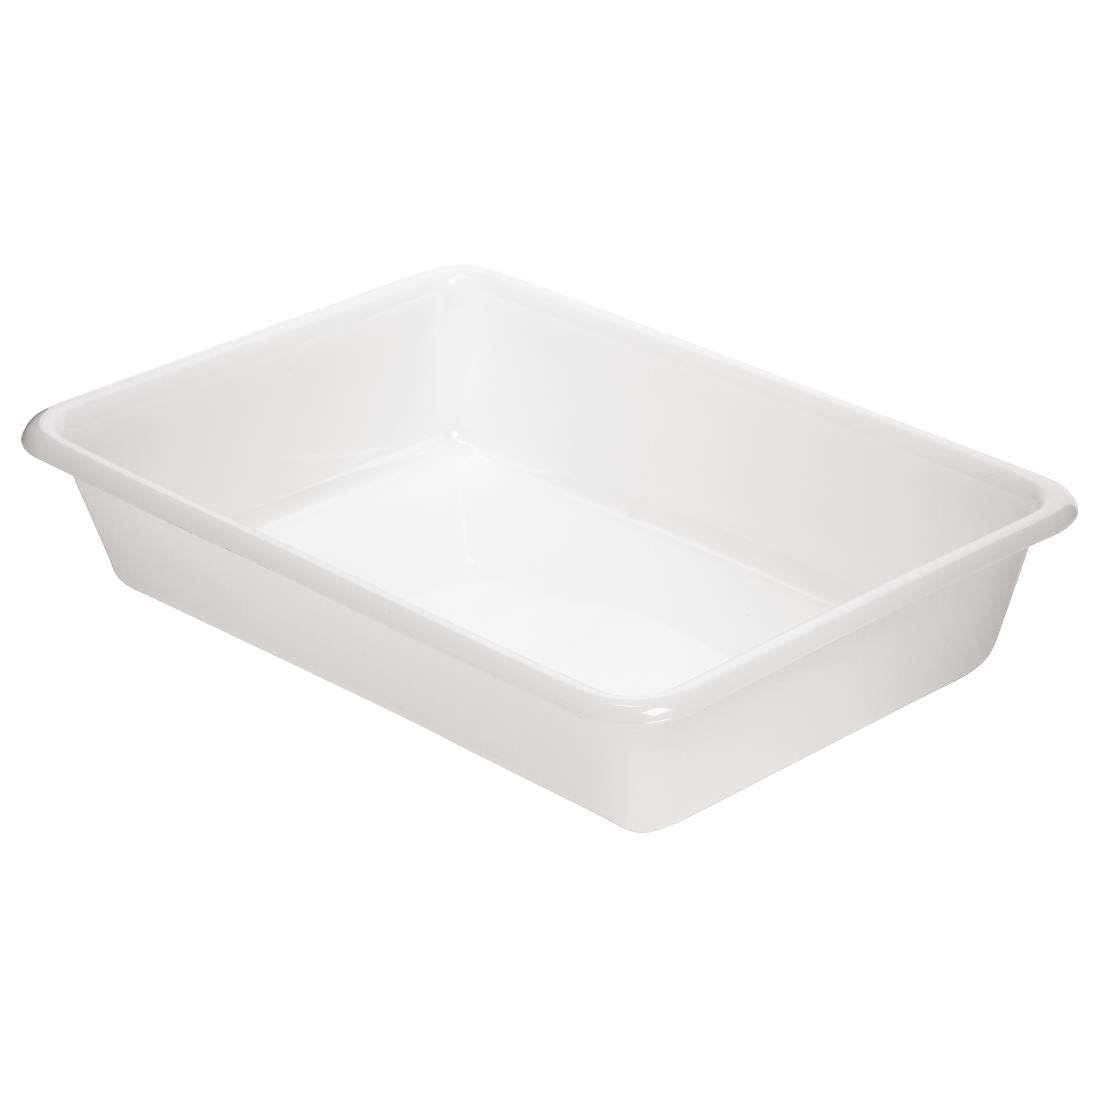 Araven Food Storage Tray 17in JD Catering Equipment Solutions Ltd